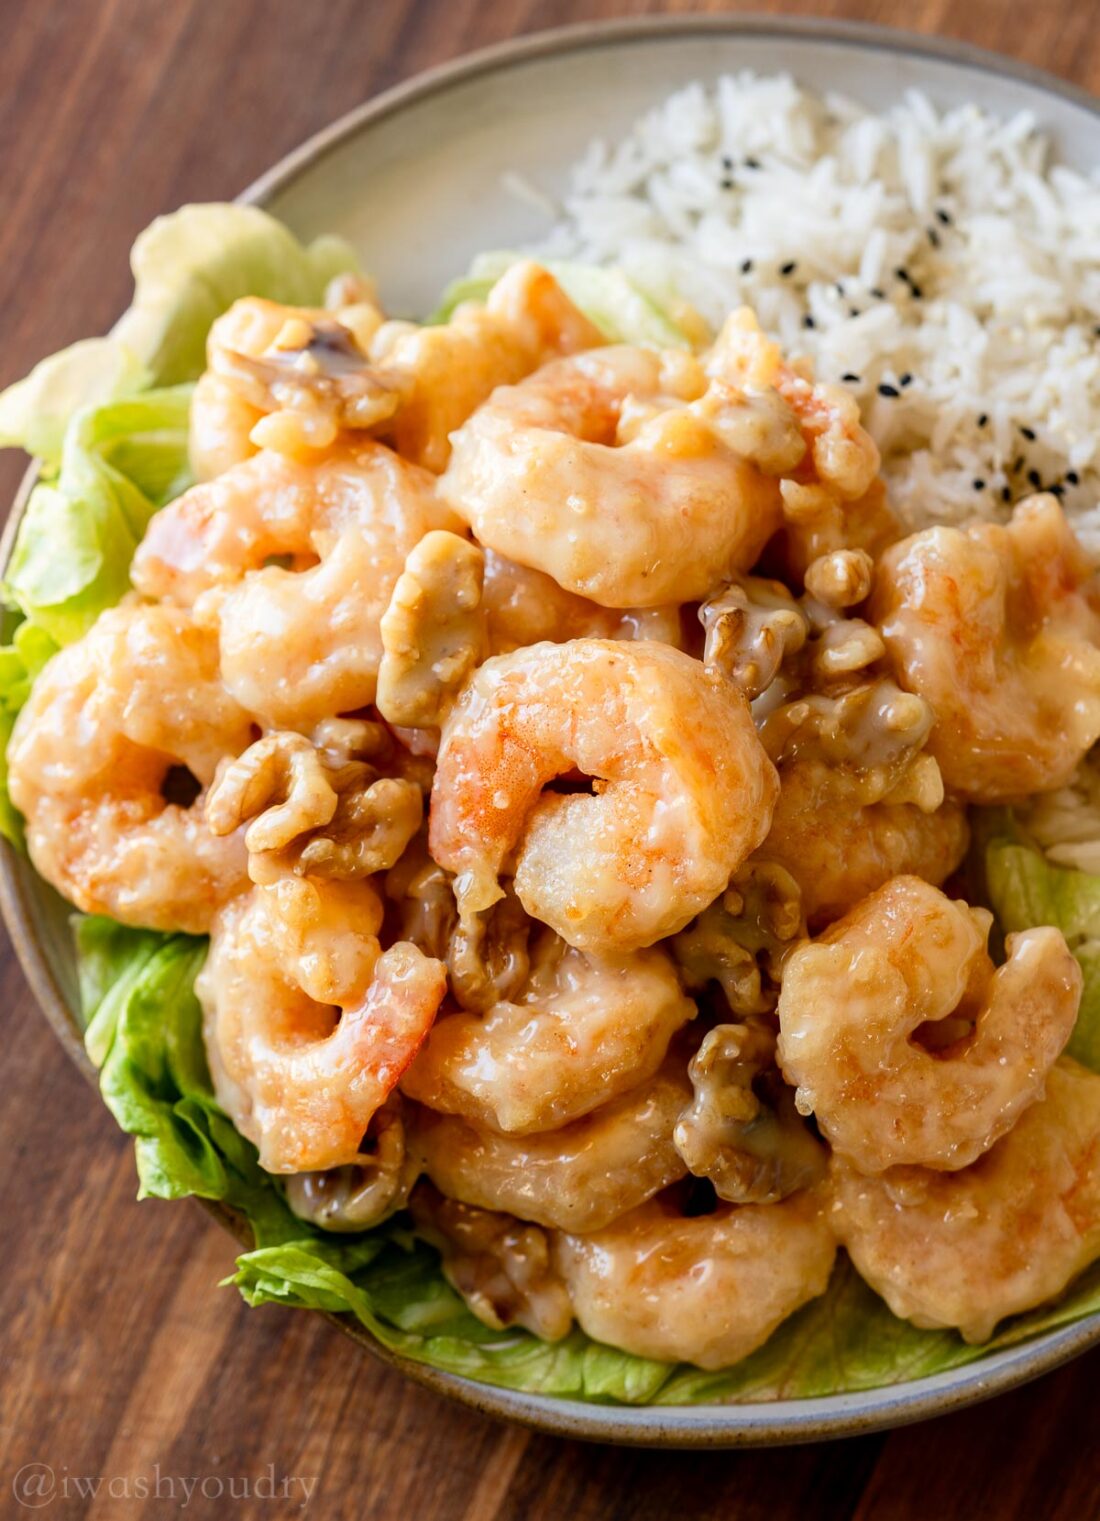 shrimp coated in sweet white sauce with walnuts on a bed of lettuce.